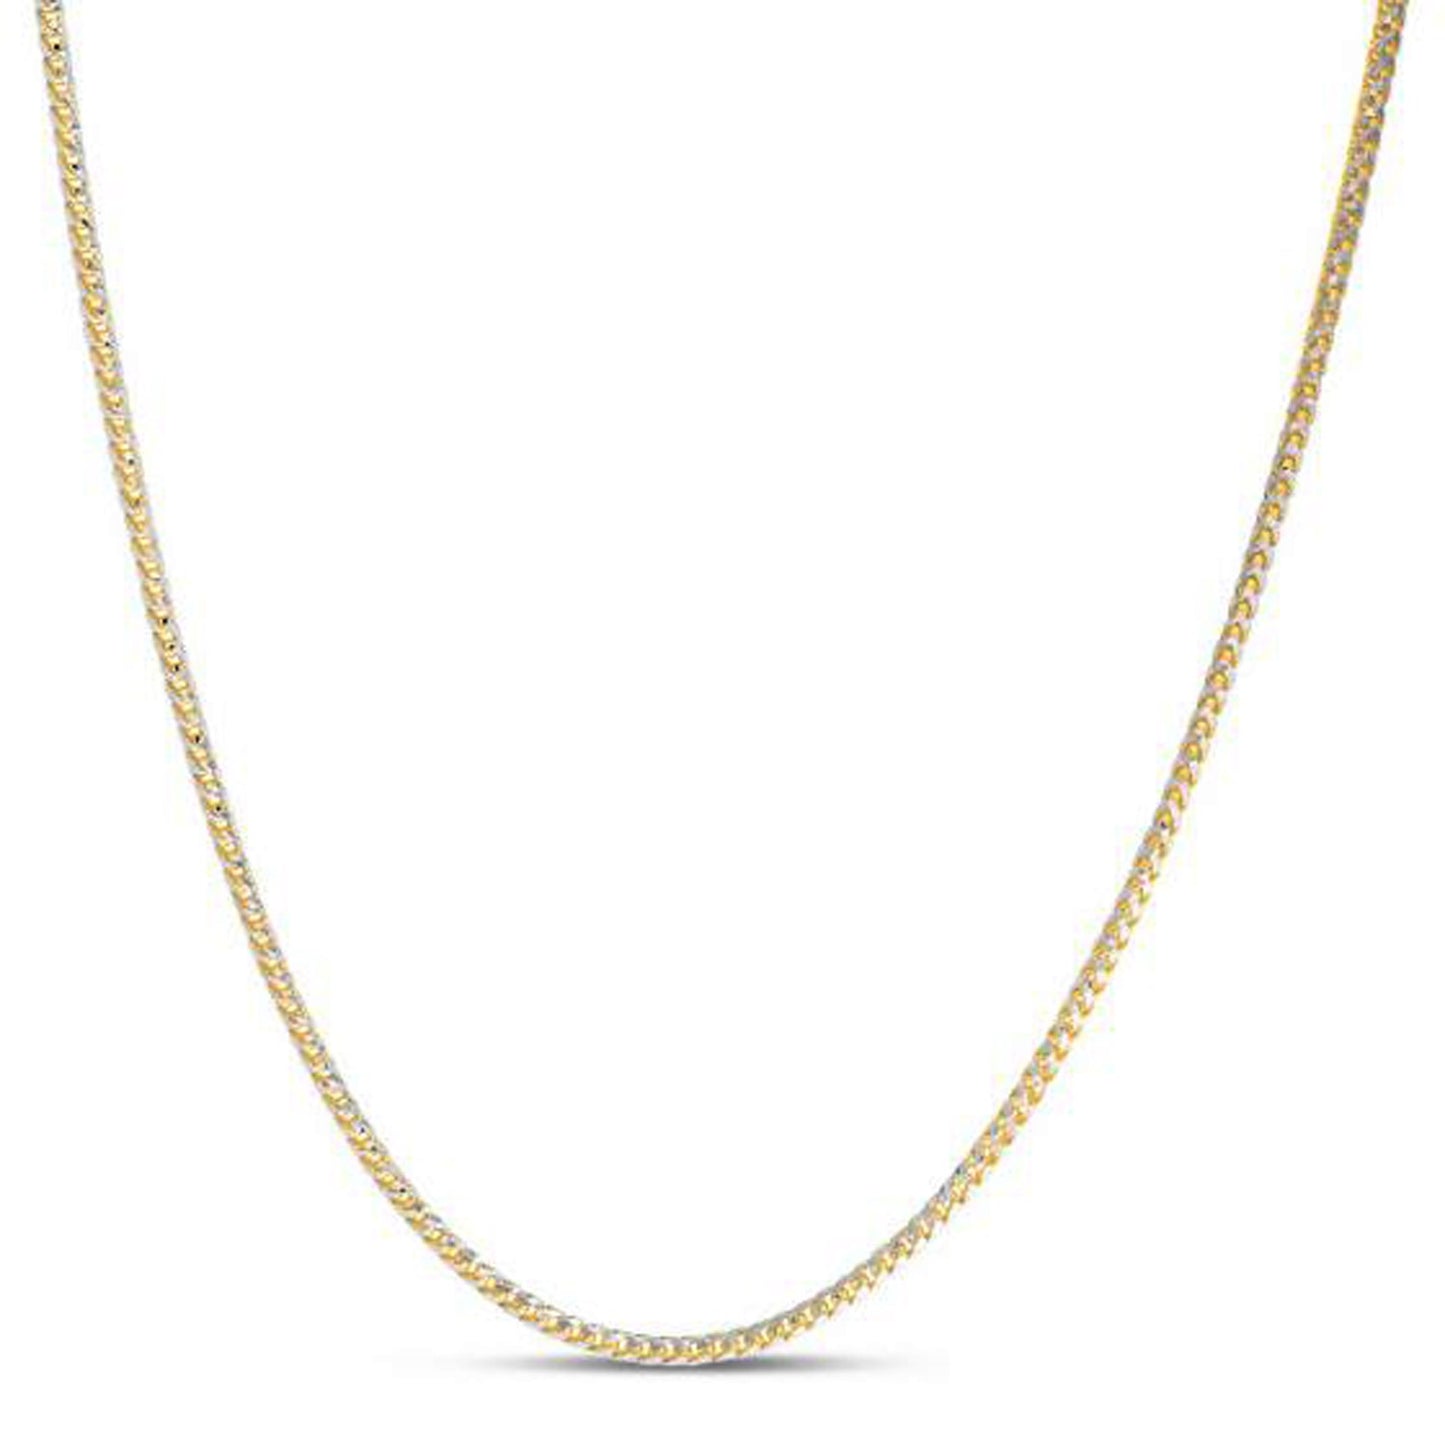 2.3mm 14k Yellow Gold Round Pave Franco Chain